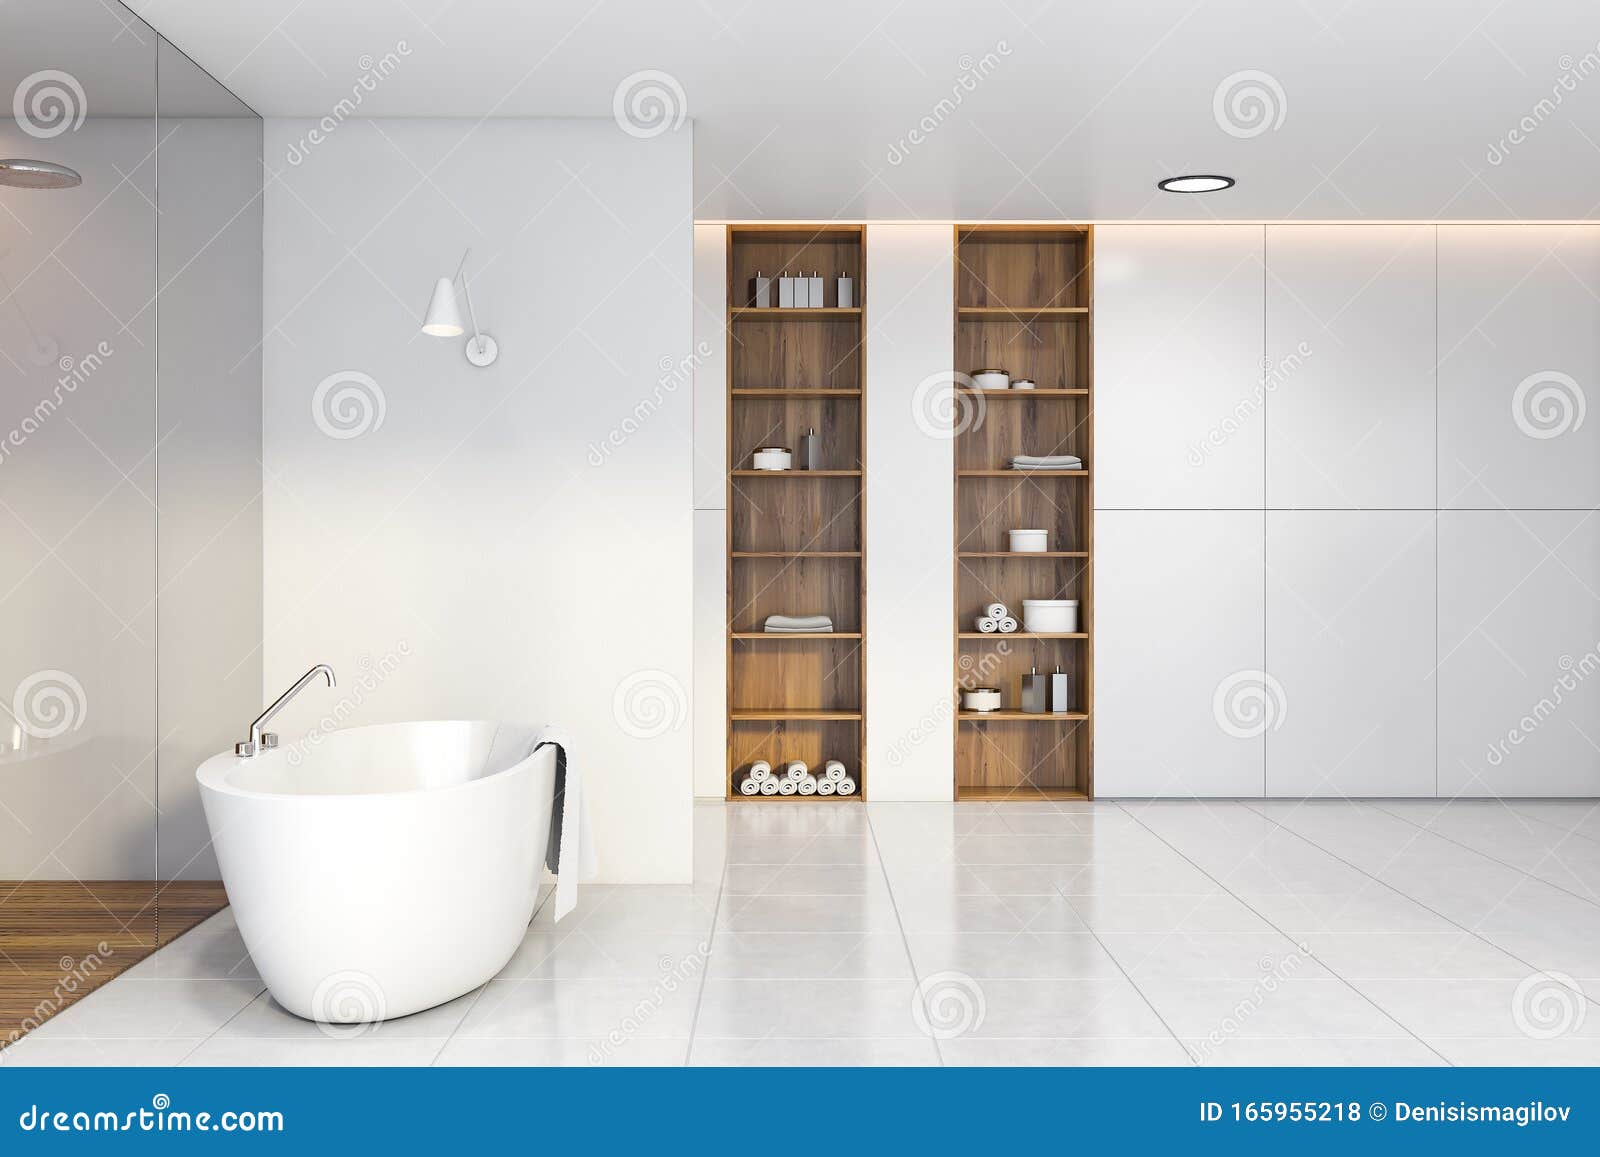 Wood And Grey Bathroom Tub And Shower Side View Stock Illustration Illustration Of Furniture Faucet 165955218